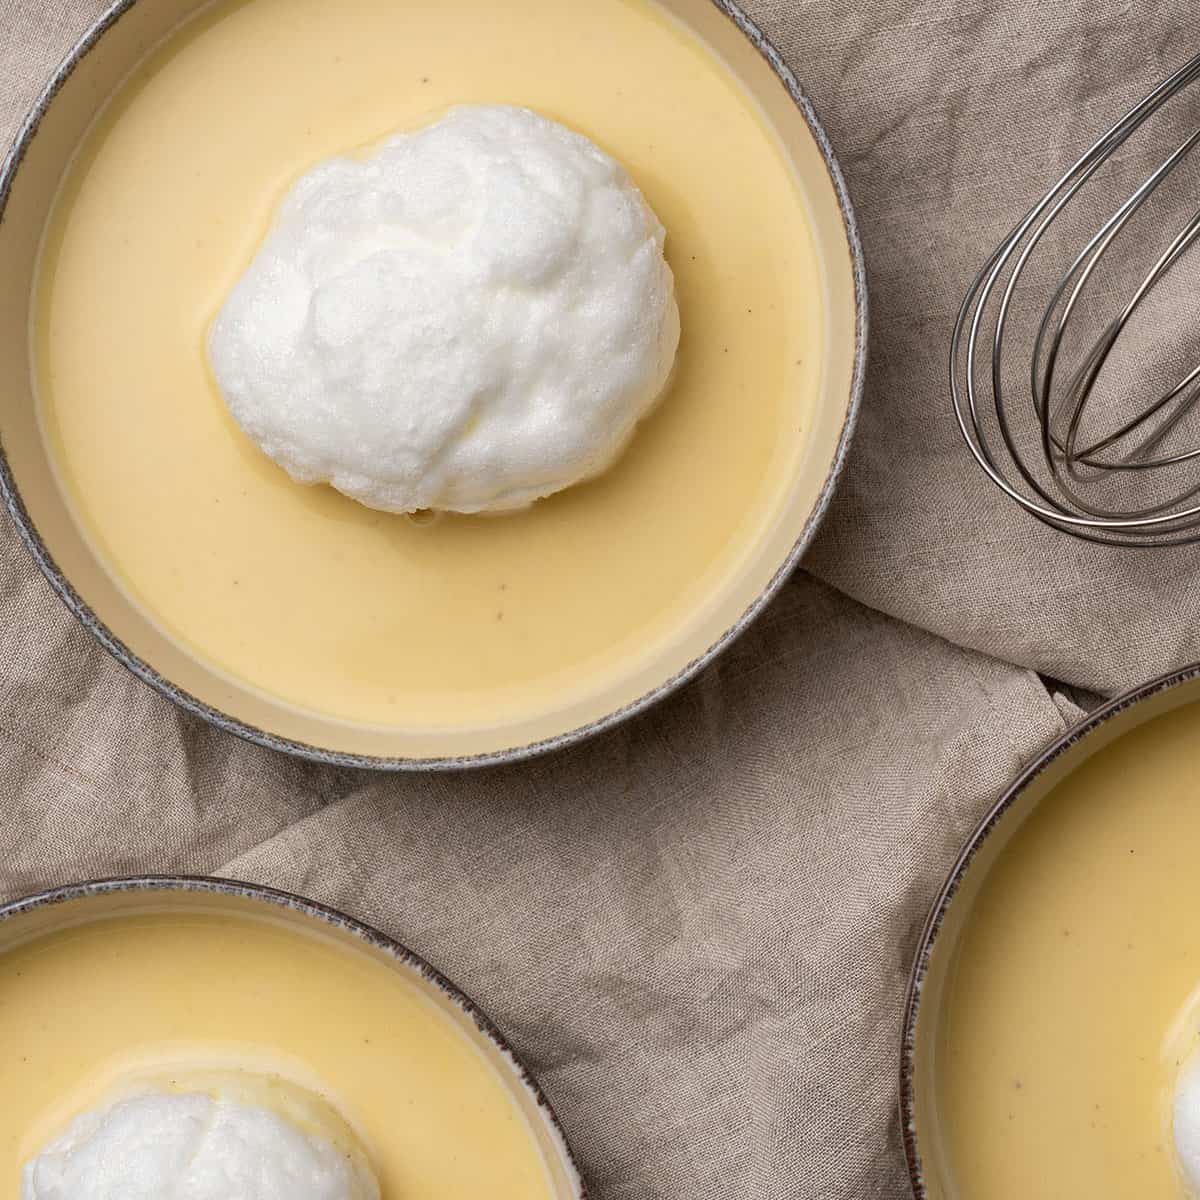 <p>Floating Island is a classic French dessert that resembles an island, hence the name! The dessert is effectively a <a href="https://www.spatuladesserts.com/creme-anglaise/">Crème Anglaise</a> custard with poached meringue floating on top, which sounds complicated but it is a lot easier to make than it sounds.</p> <p>This fancy-looking French dessert does not require baking and only contains simple ingredients so it is in fact quite simple to make yourself at home.</p> <p><strong>Get the recipe: <a href="https://www.spatuladesserts.com/floating-island-dessert/">Floating island</a></strong></p>